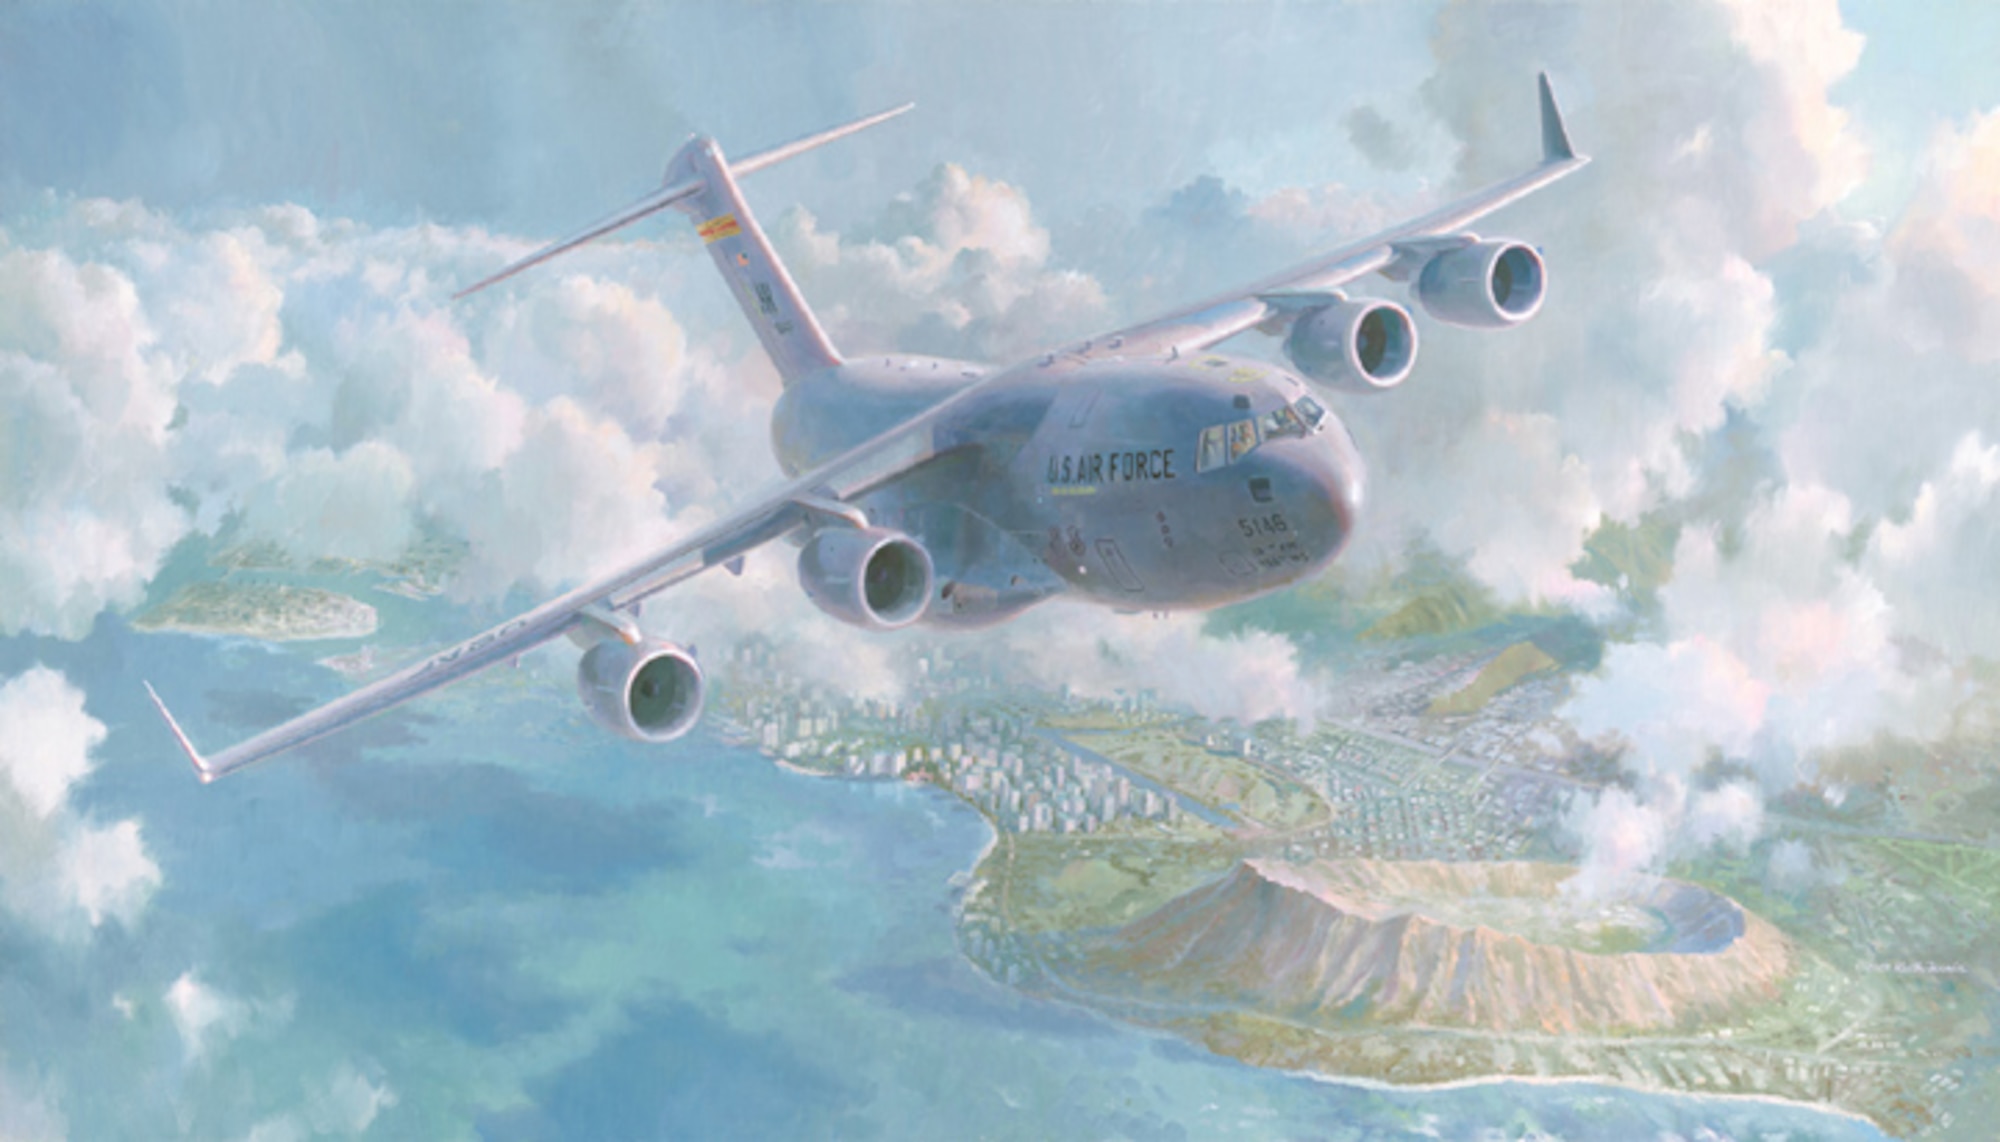 Commemoration of the First Anniversary of Hickam’s C-17 Squadron, Keith Ferris’ Original Painting of “Waikiki Sunrise” to the United States Air Force Art Collection Sponsored by Boeing and Pratt & Whitney Company